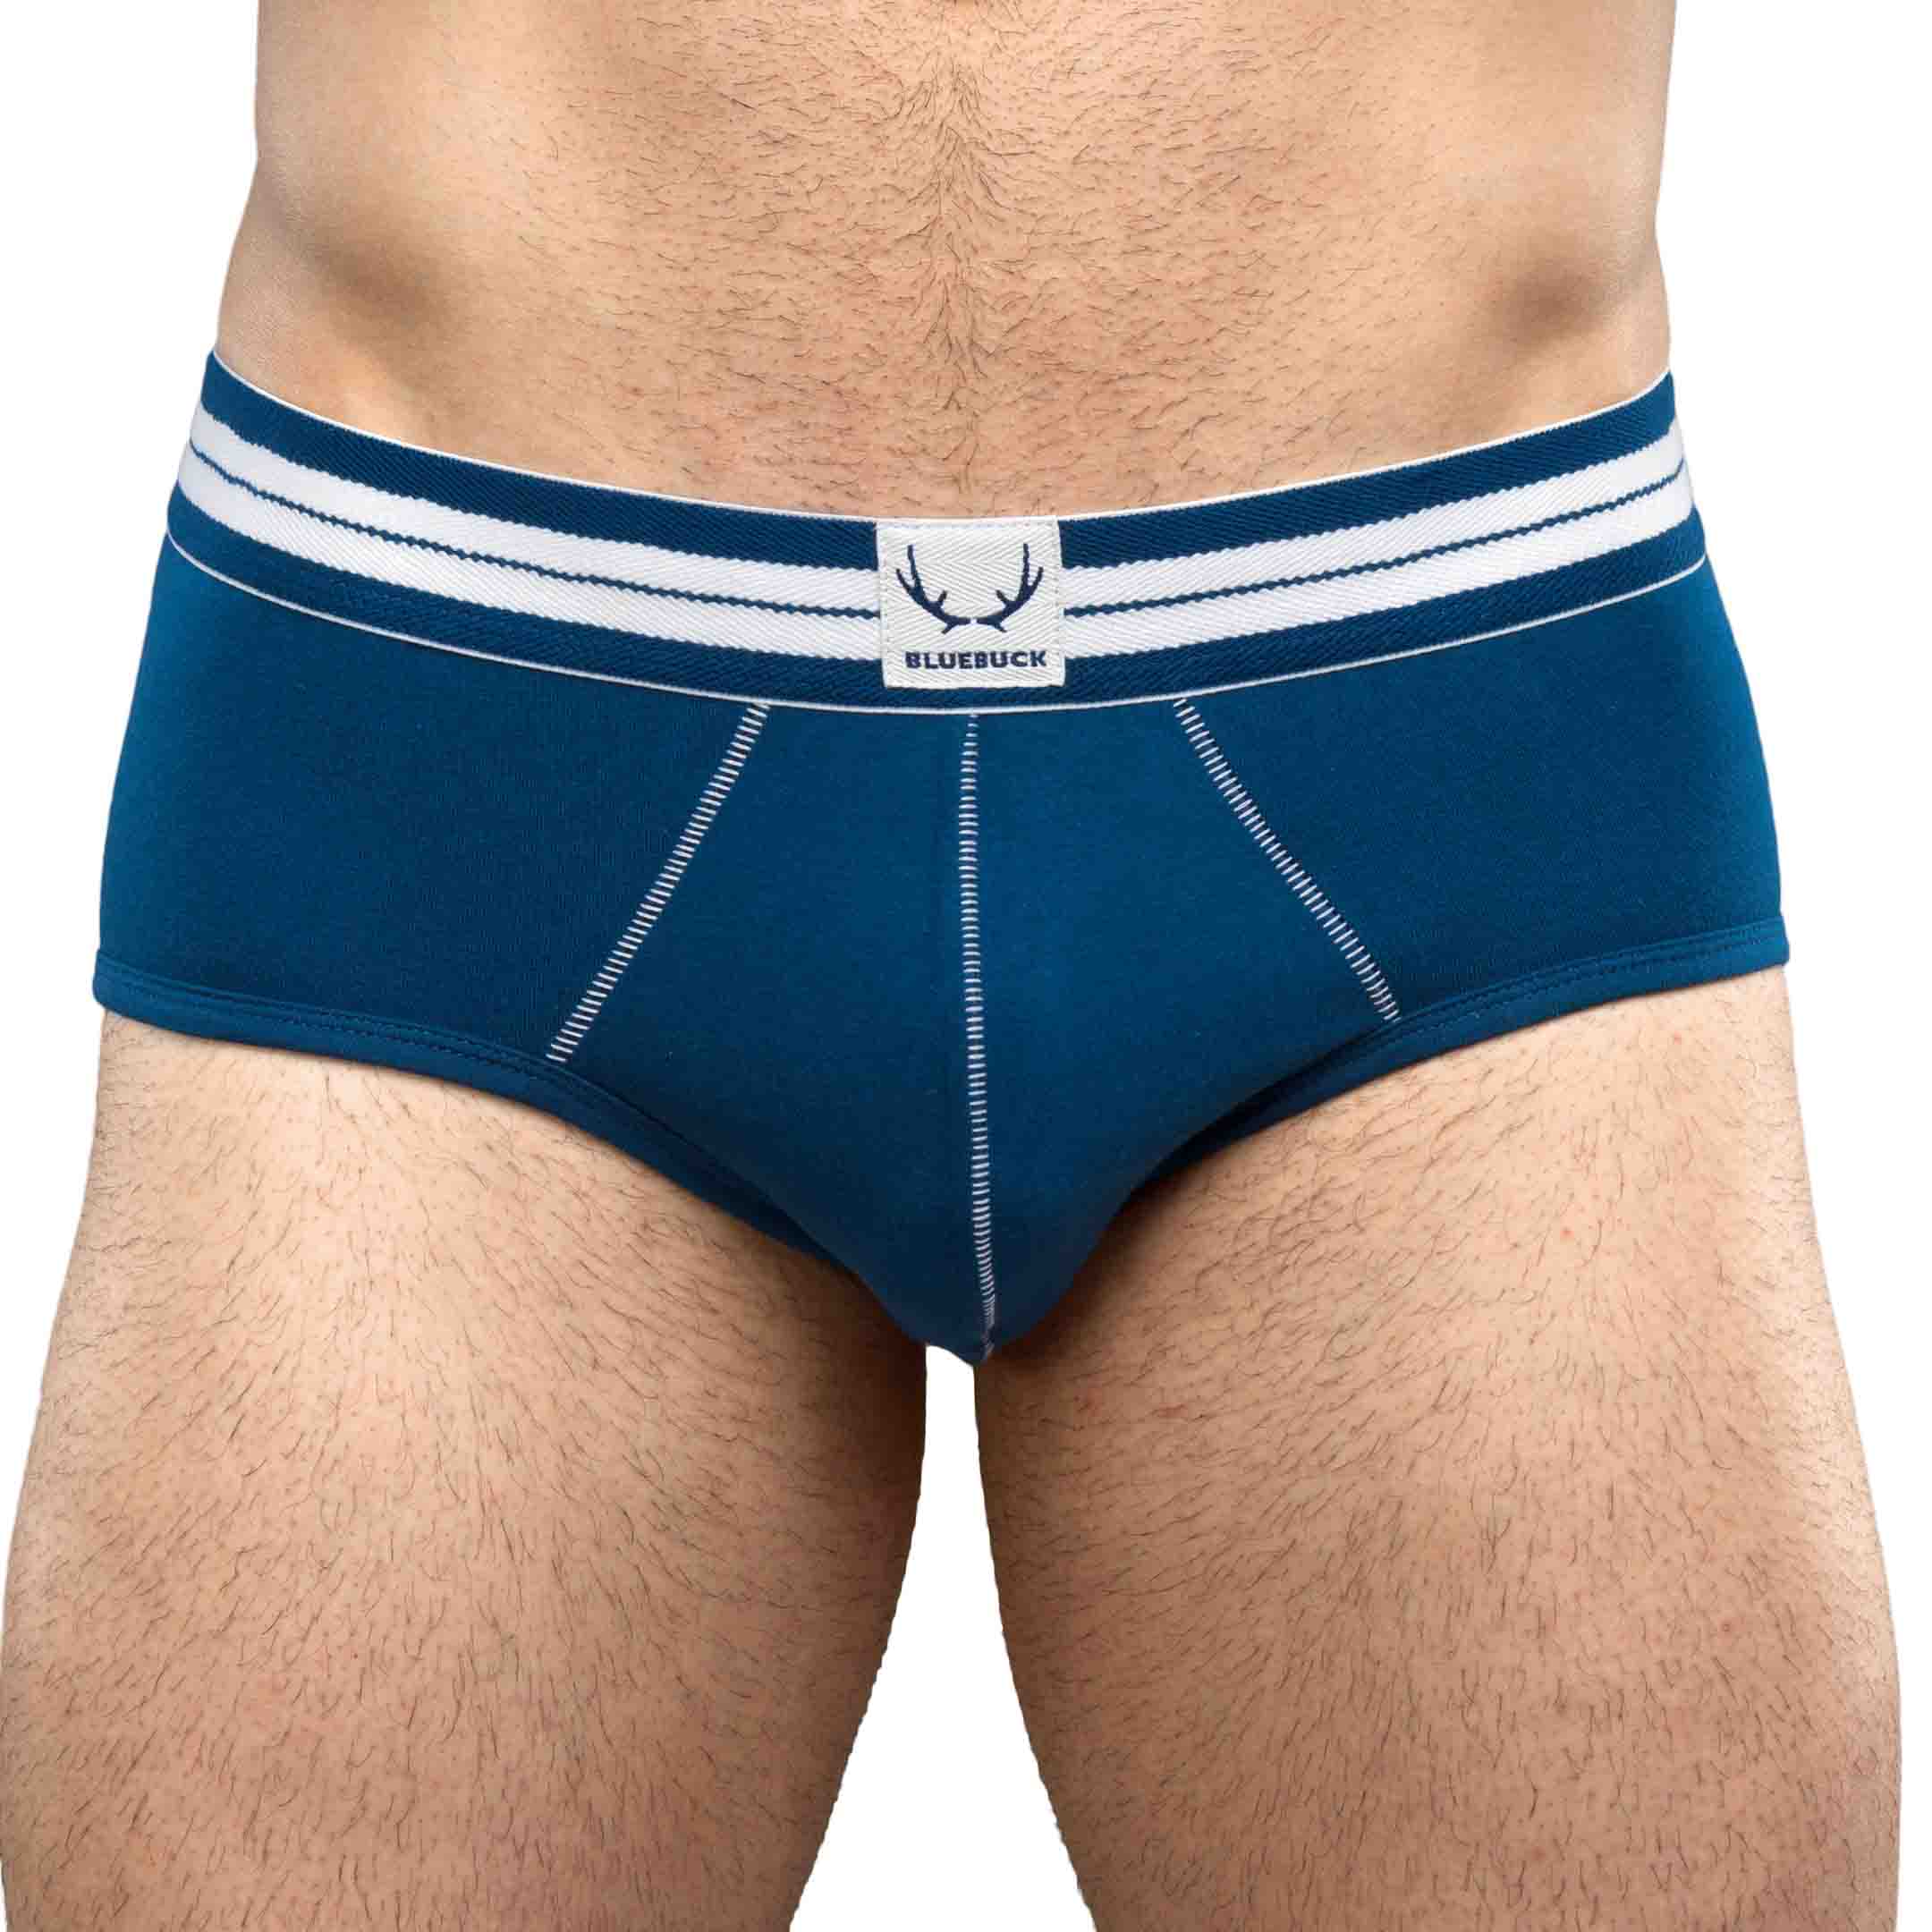 Navy blue underpants with white seams made of organic cotton from Bluebuck